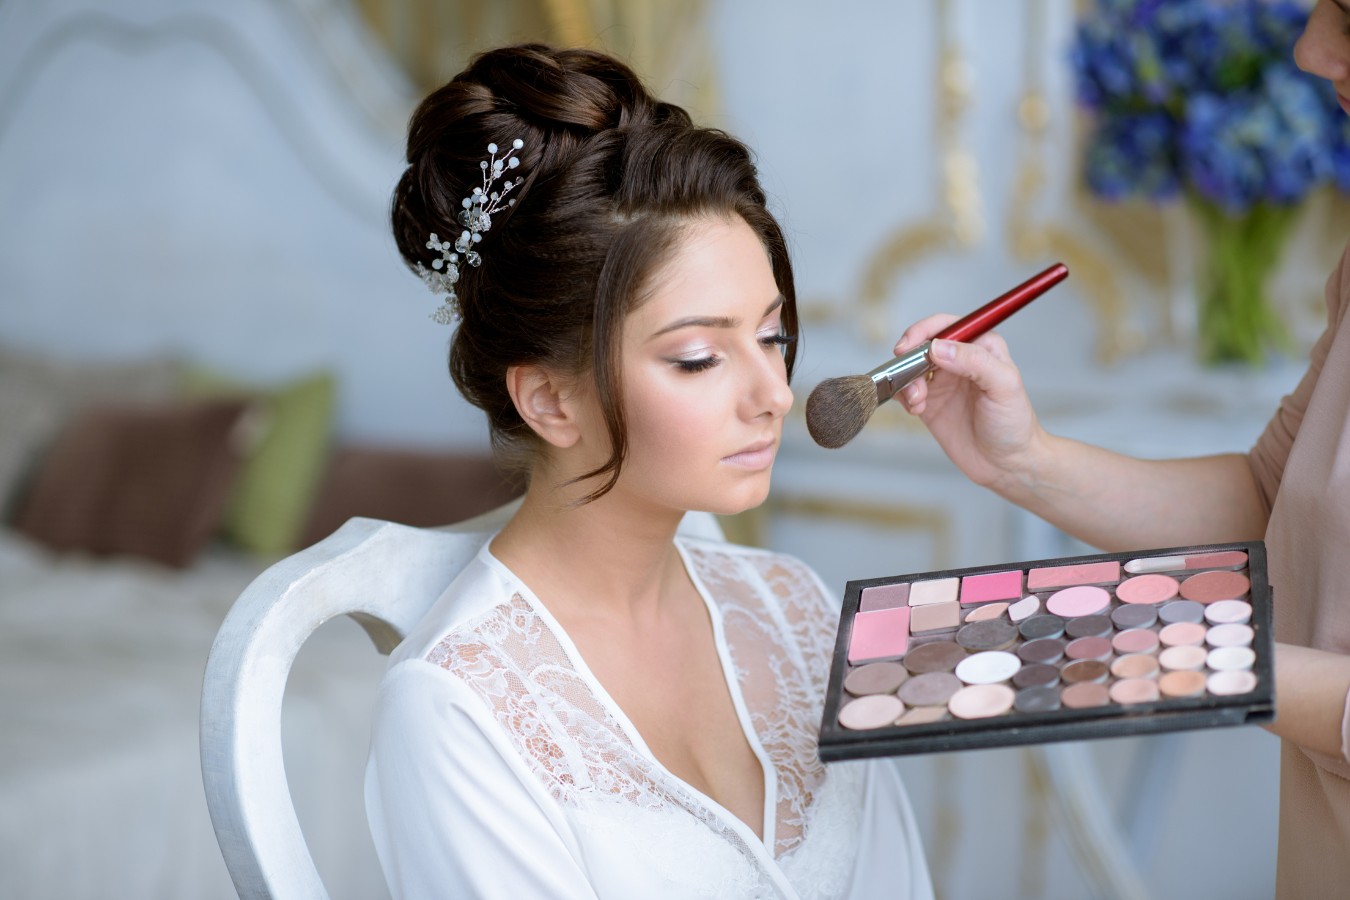 DIY Natural Wedding Makeup Guide: 6 Ways to Embrace Your Radiant Beauty